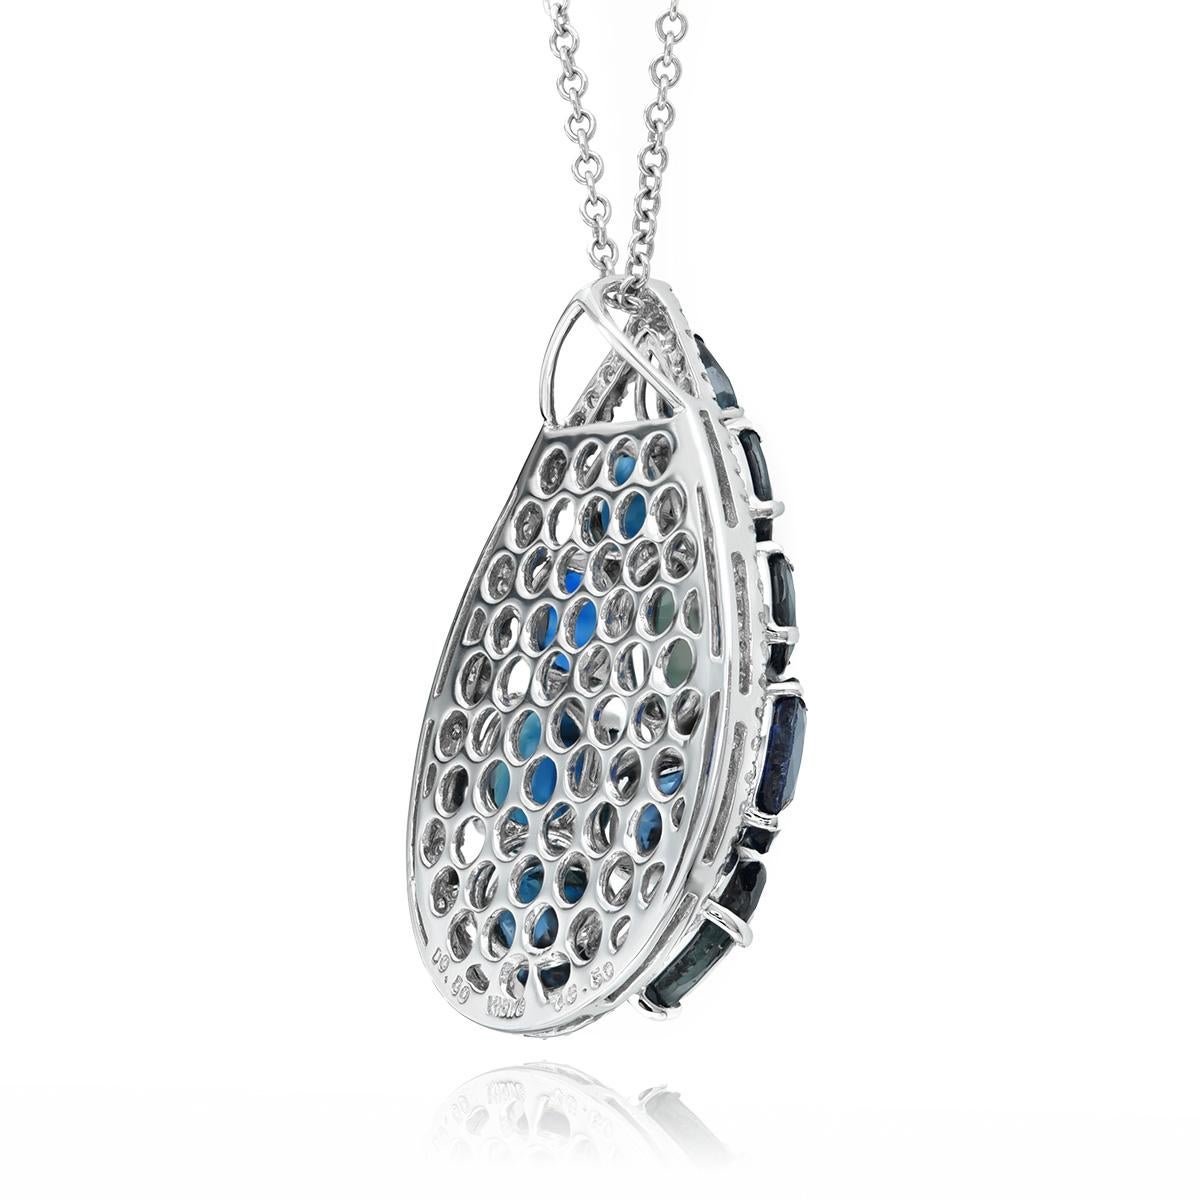 Modern 16.50Ct Natural Blue Sapphires Diamond 18K White Gold Necklace, Jewelry Sapphire For Sale